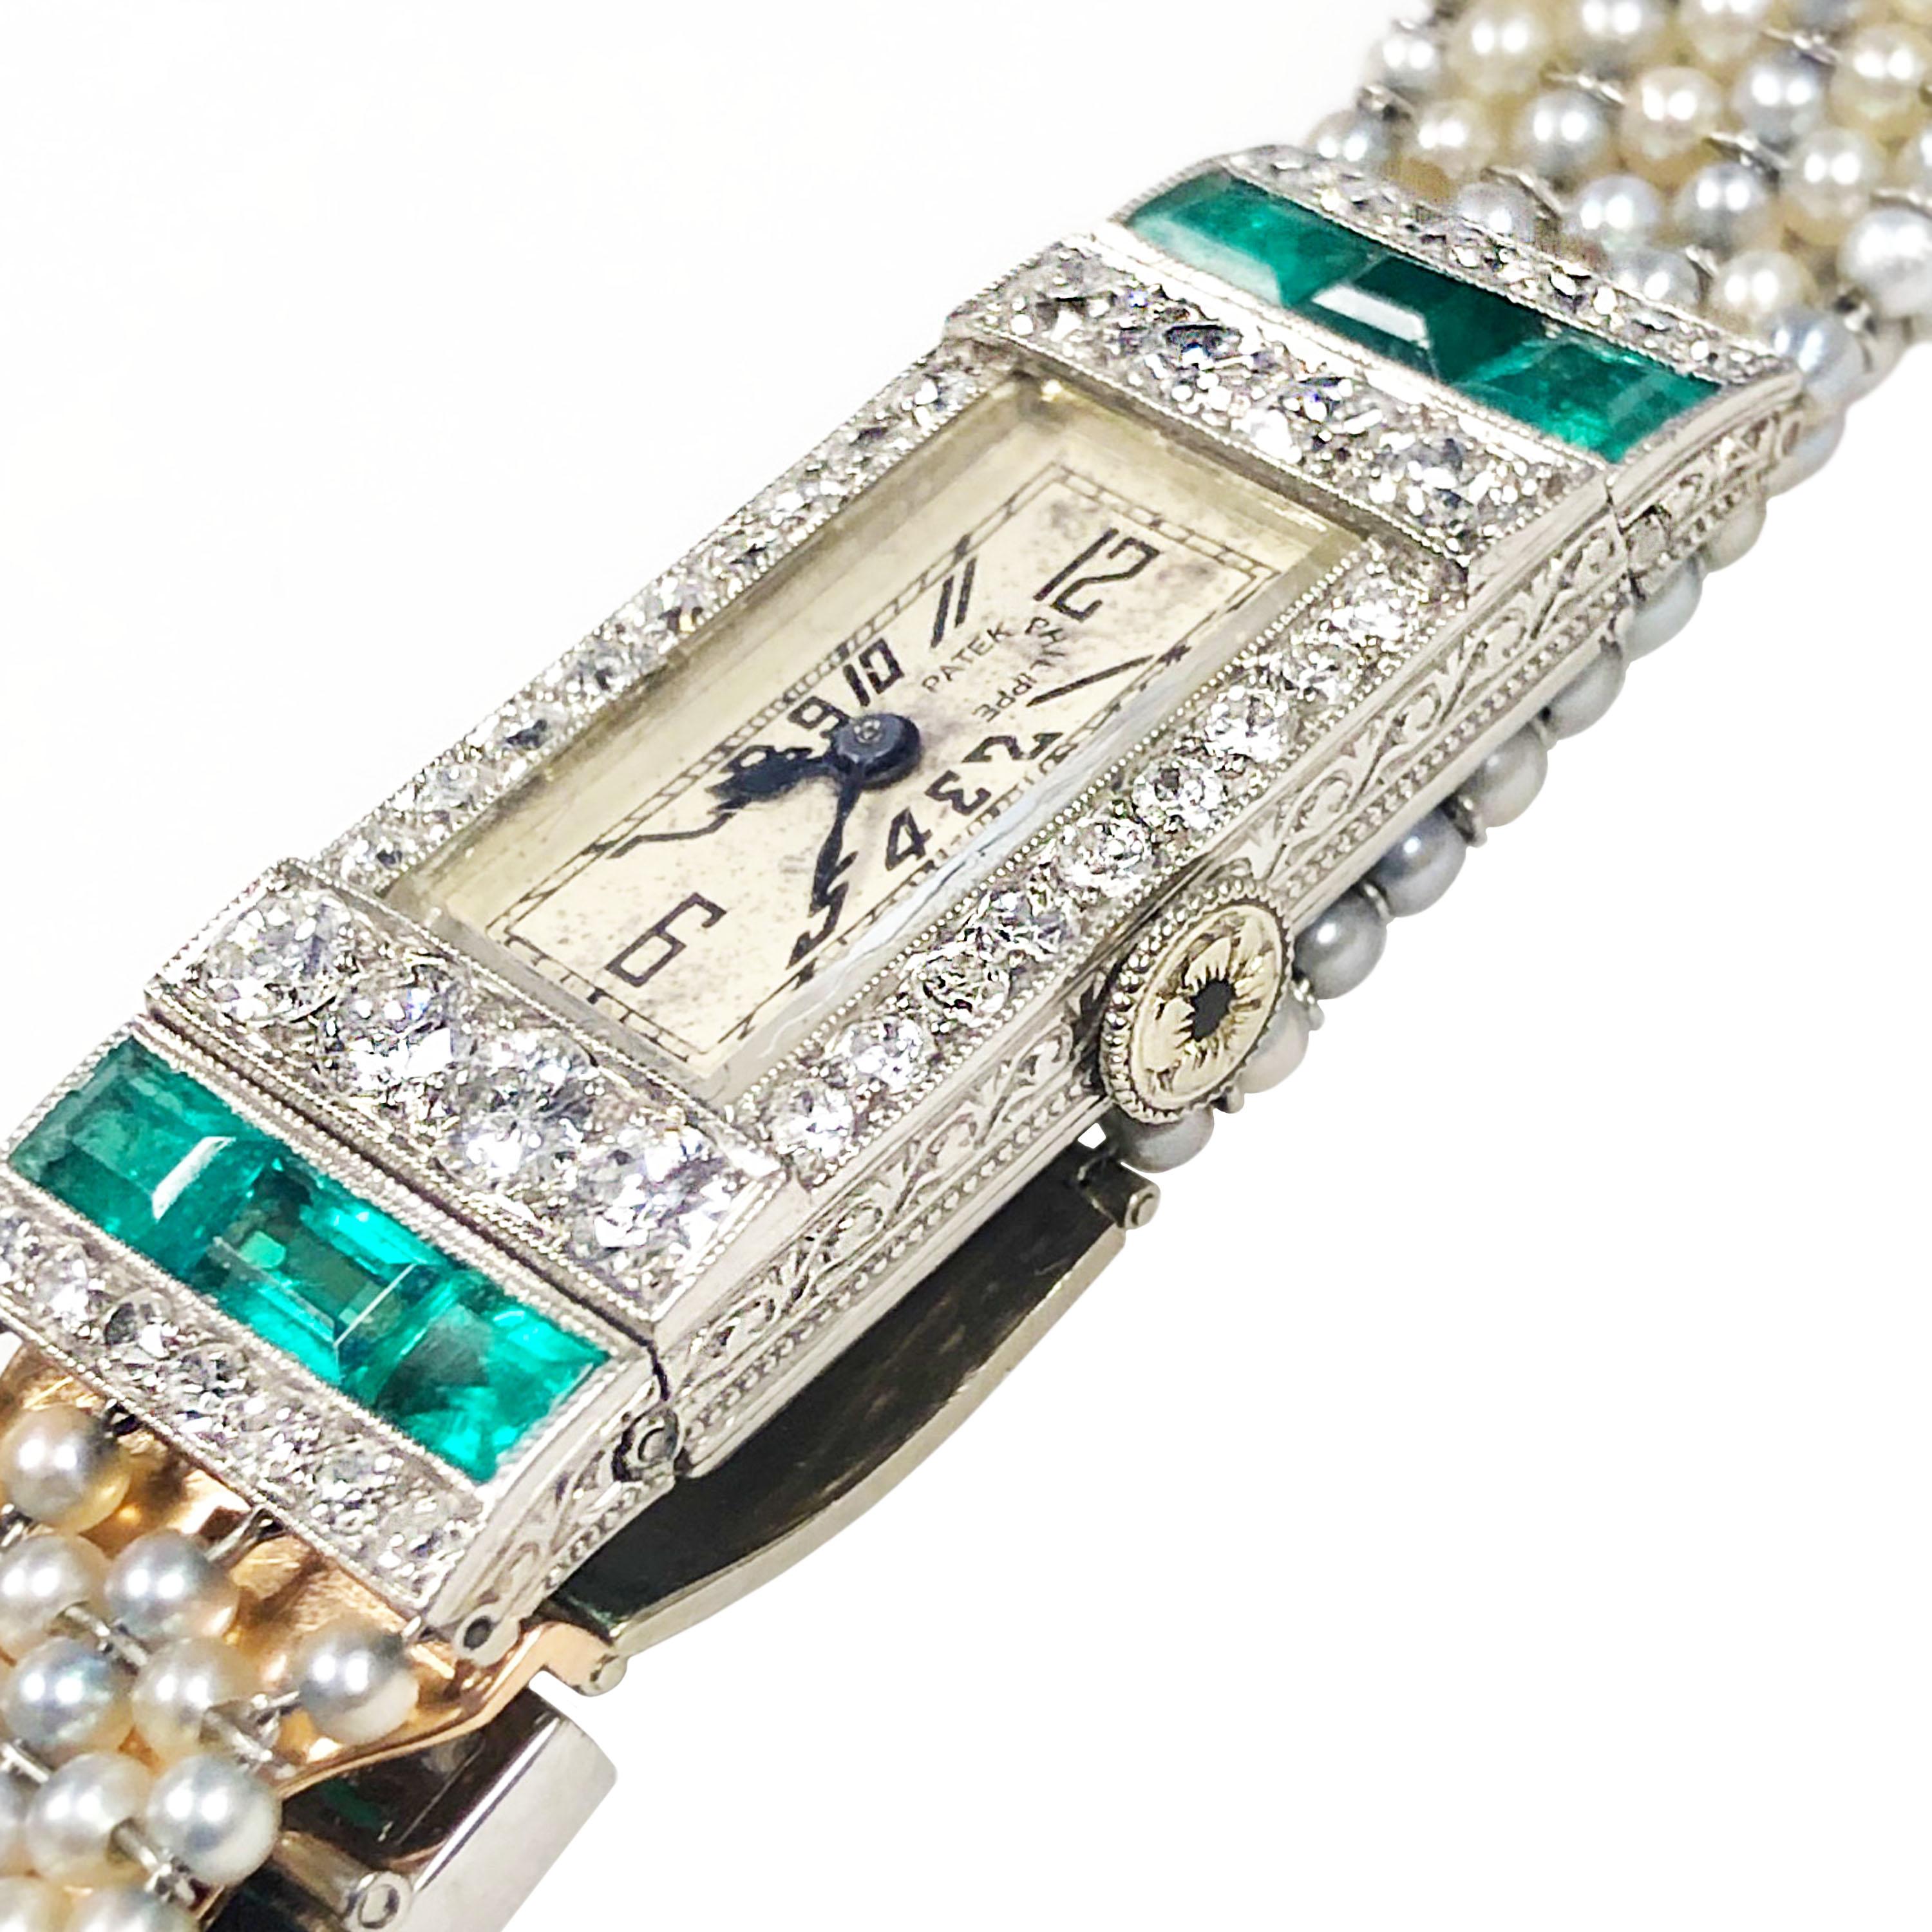 Circa 1920s Patek Philippe Ladies Art Deco Wrist Watch, 35 MM X 10 MM Platinum French hallmarked Case. The case and crown are intricately decorated with hand engraved design and Millgrain work. Set with European cut Diamonds totaling 1.50 Carats and